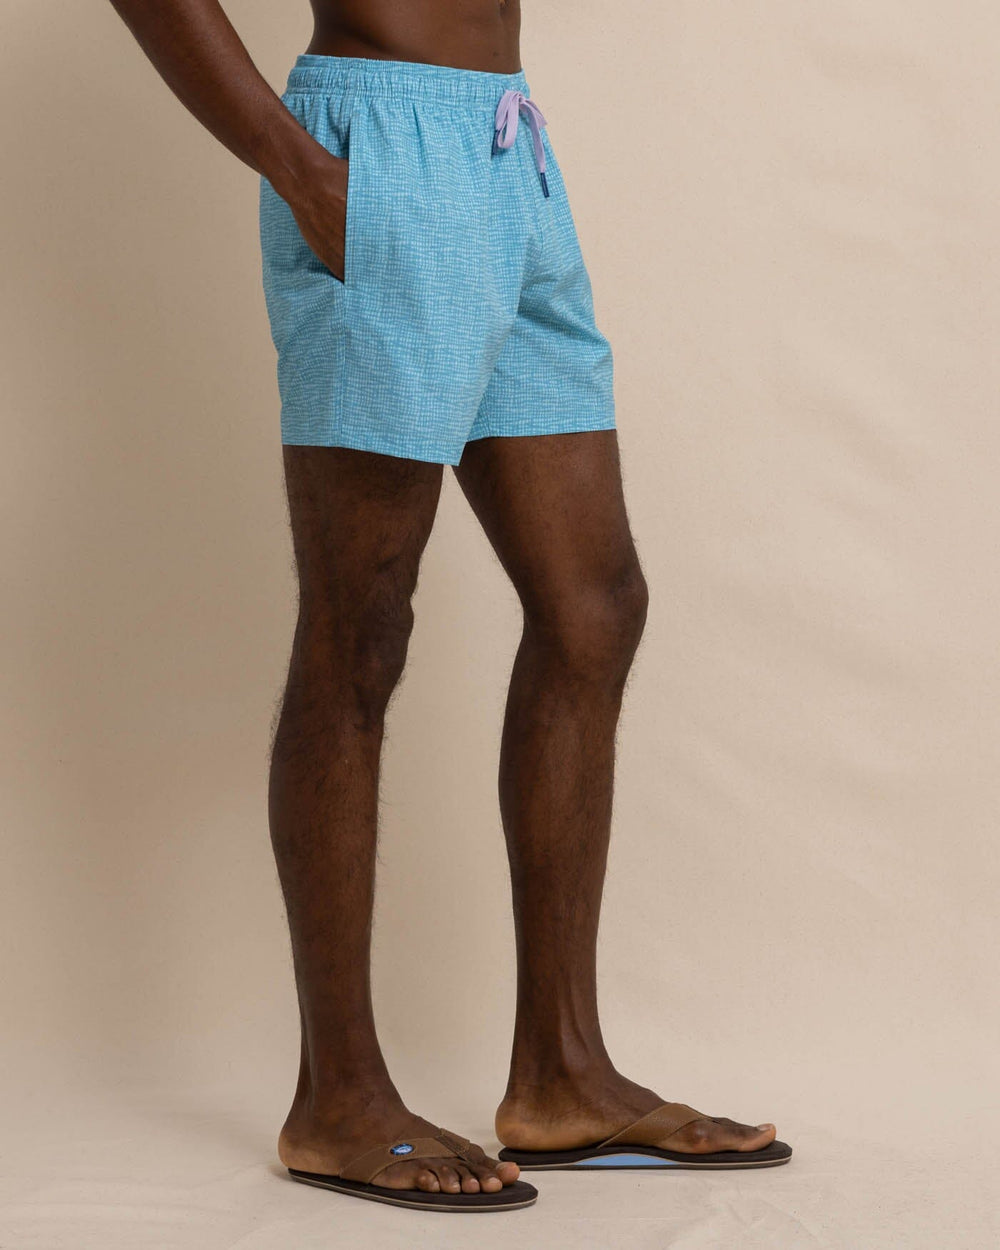 The front view of the Southern Tide Painted Check Swim Trunk by Southern Tide - Wake Blue